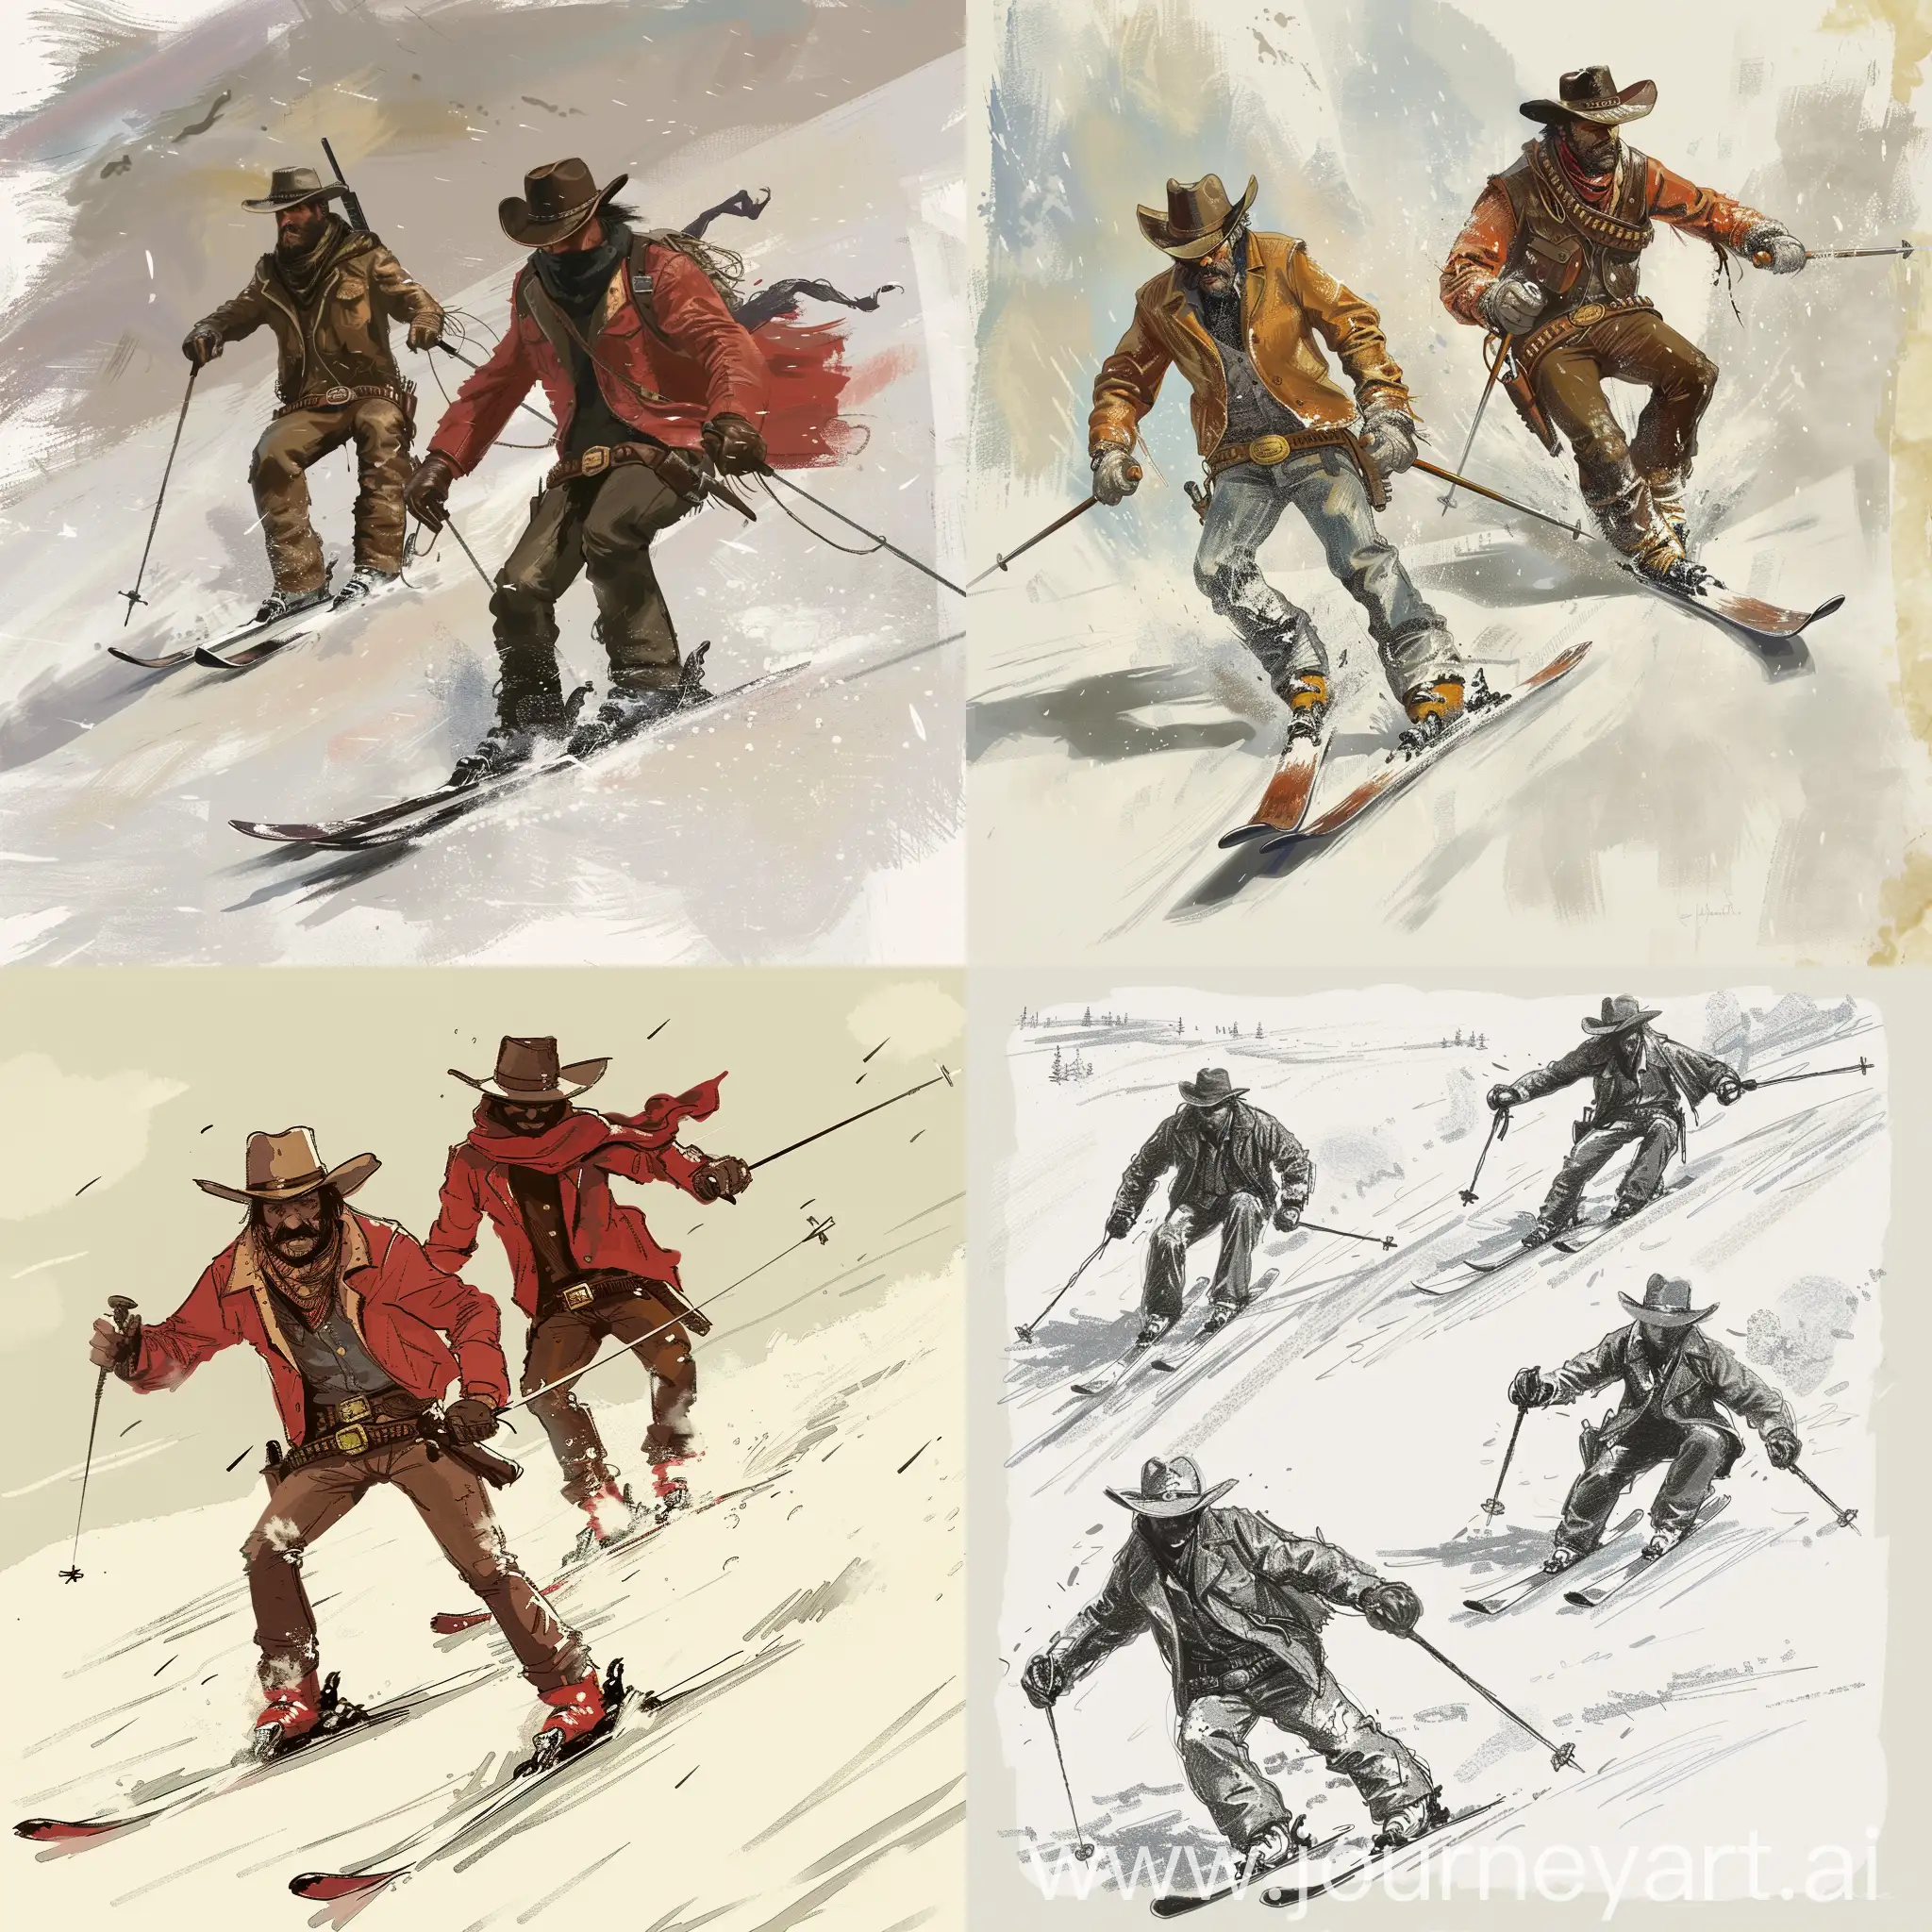 Draw Cowboys who are skiing.RDR2 style
